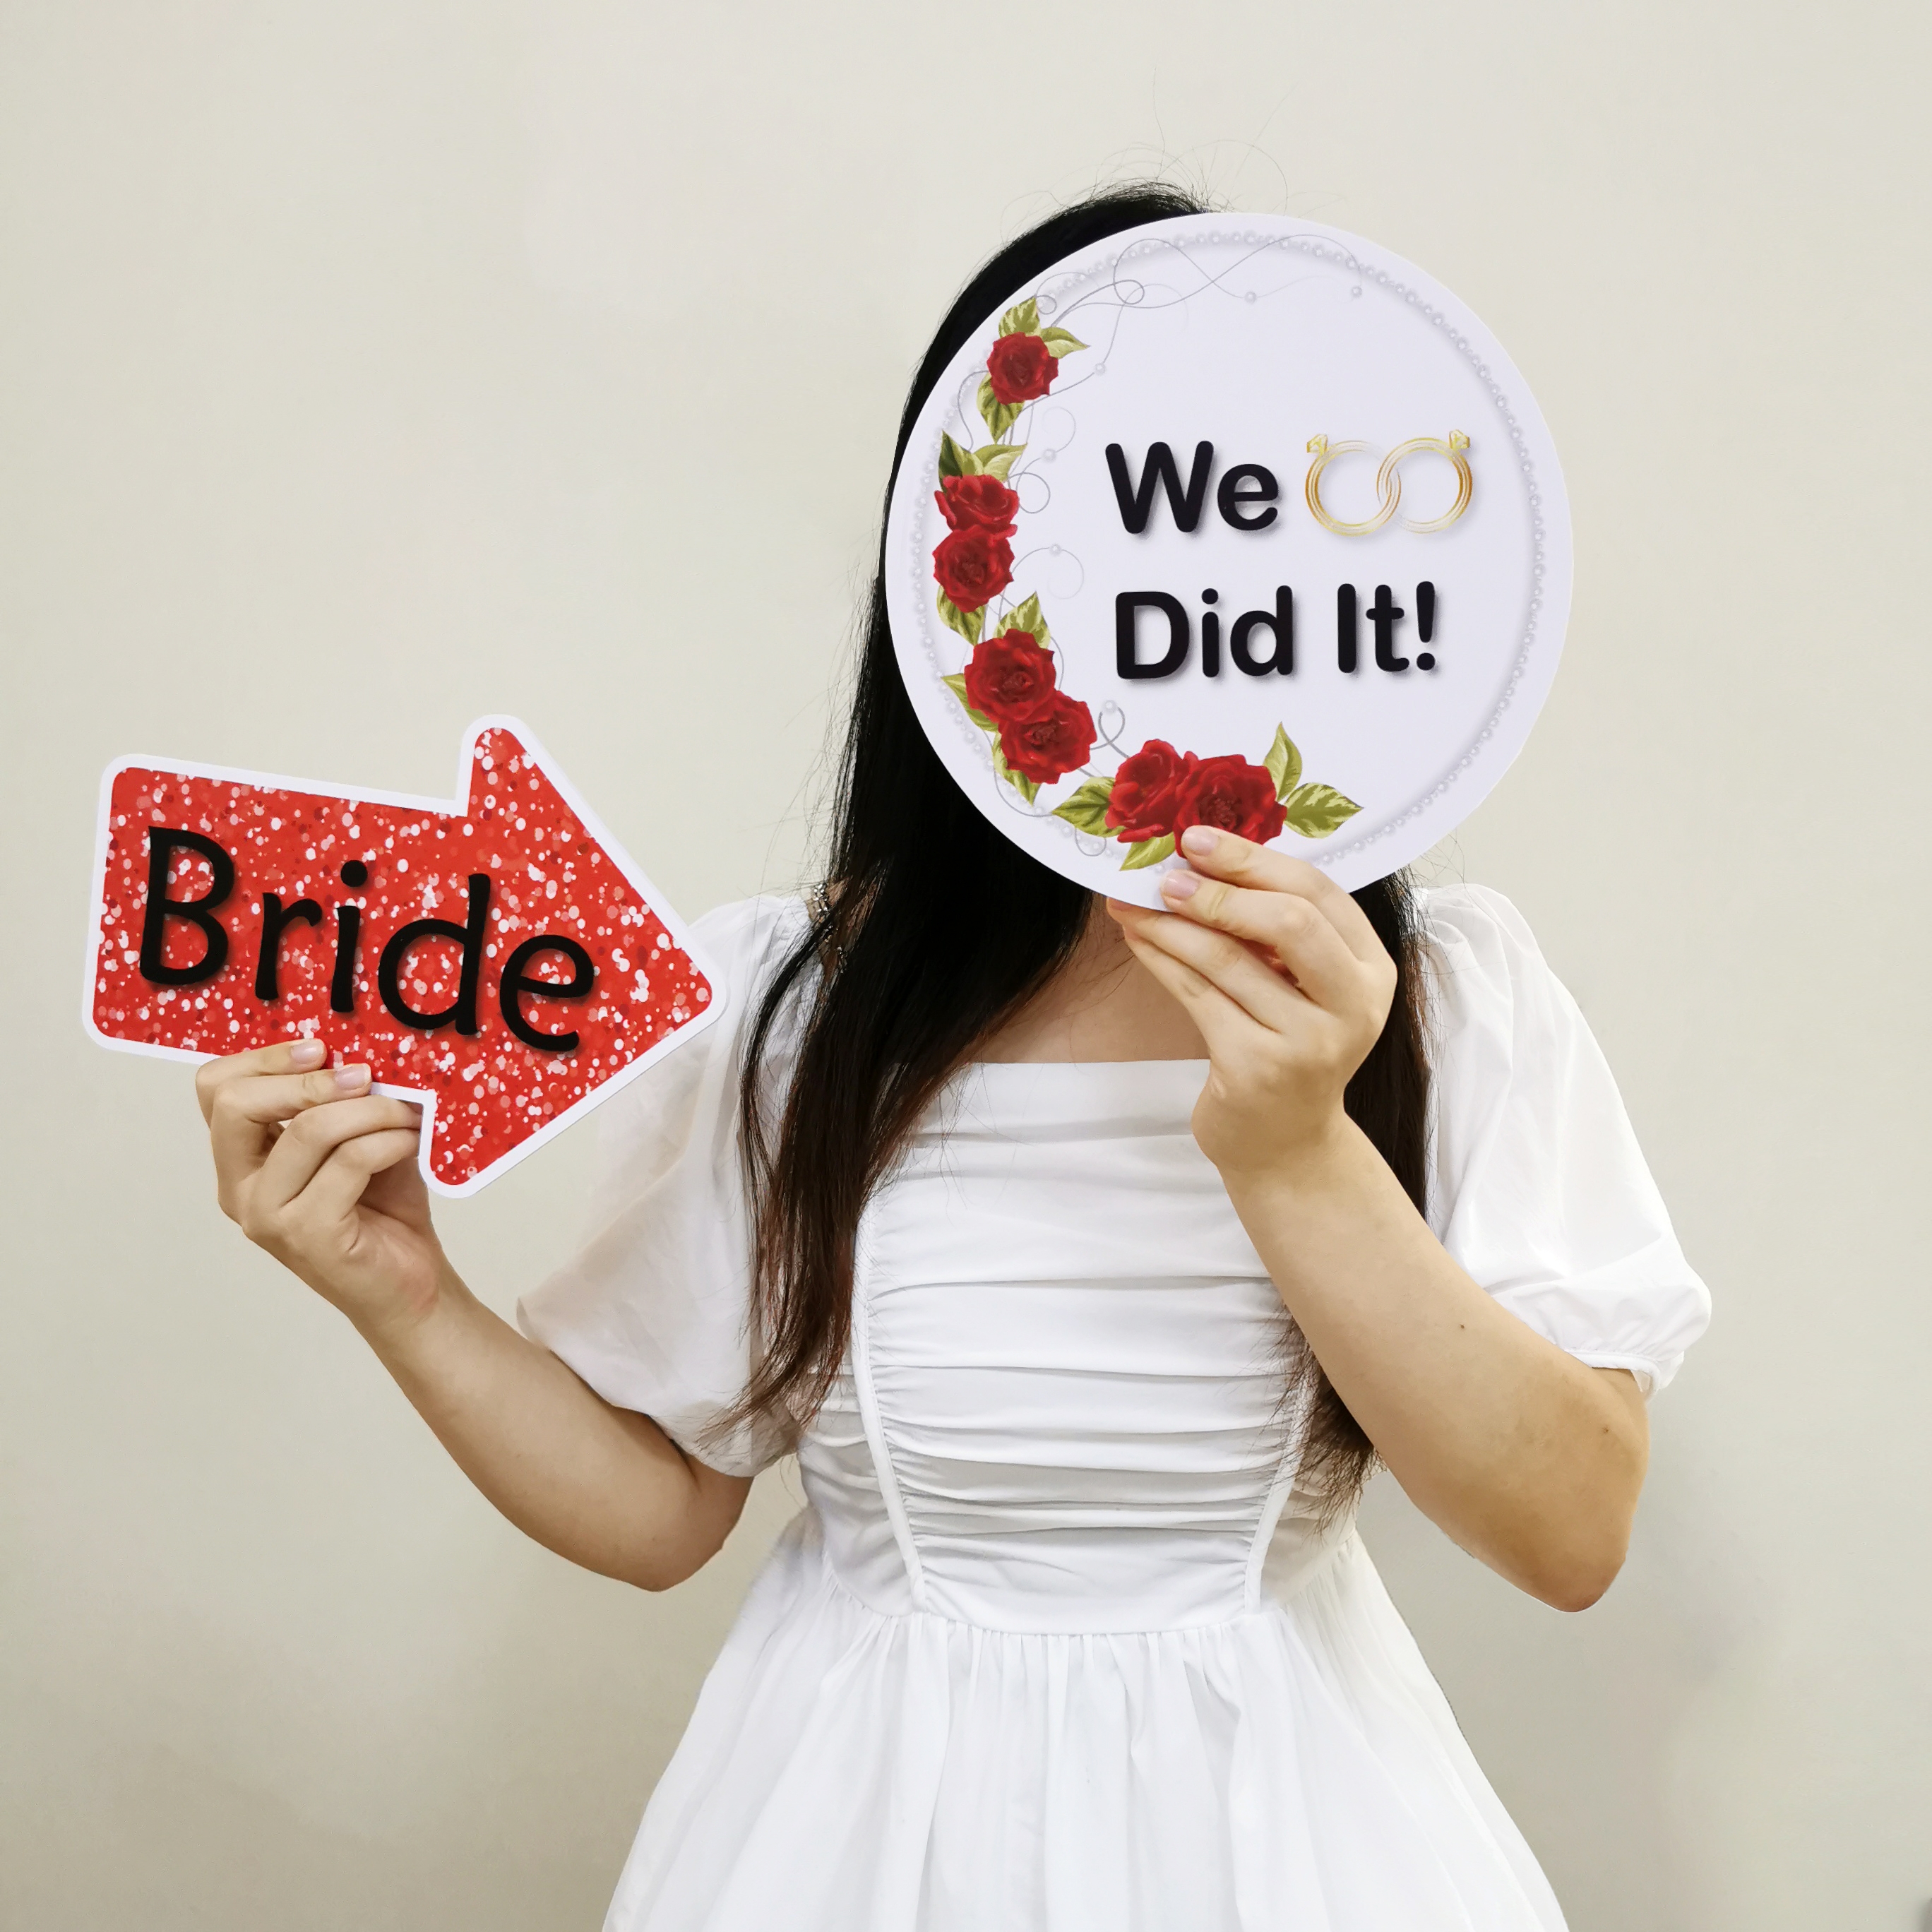 Photo Booth Prop Signs PVC Foam Board UV Printing 5mm Thickness Display Sign for Wedding Party